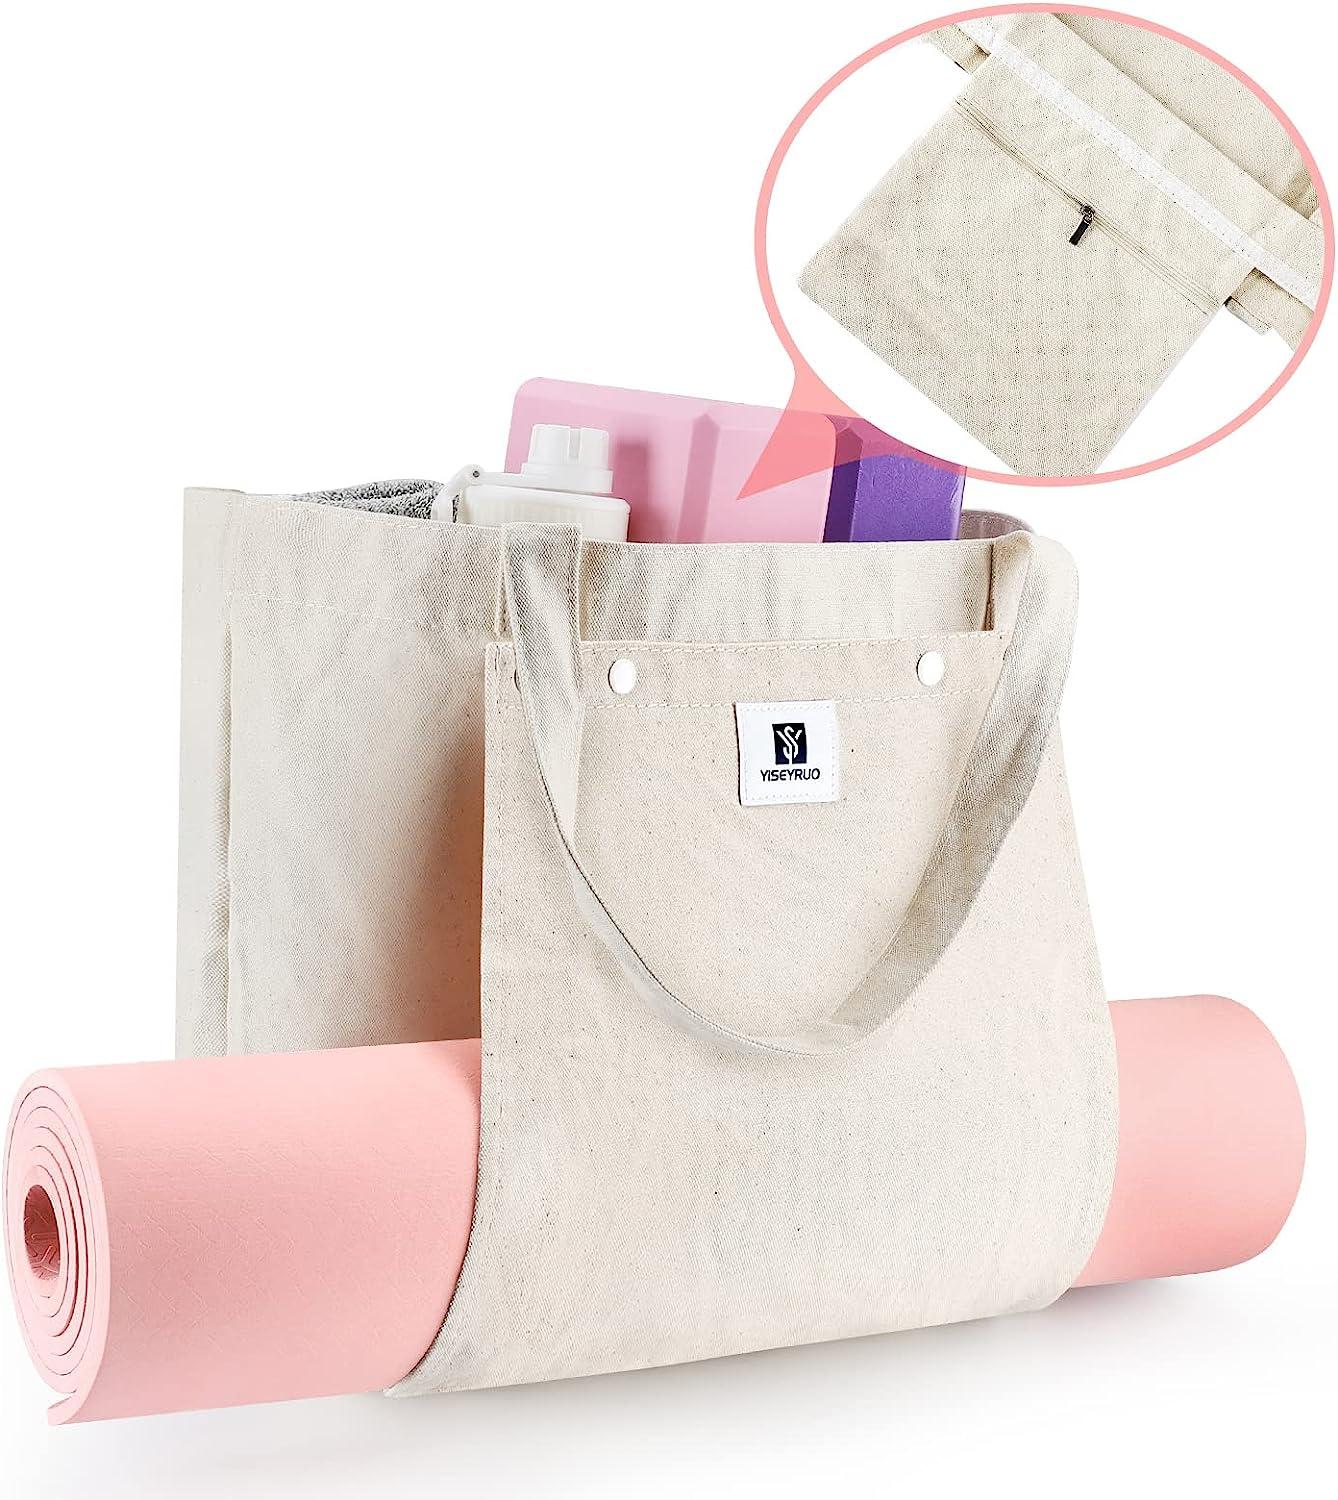 Prime of Life Yoga® & Yoga Therapy Rx™ Tote Bags